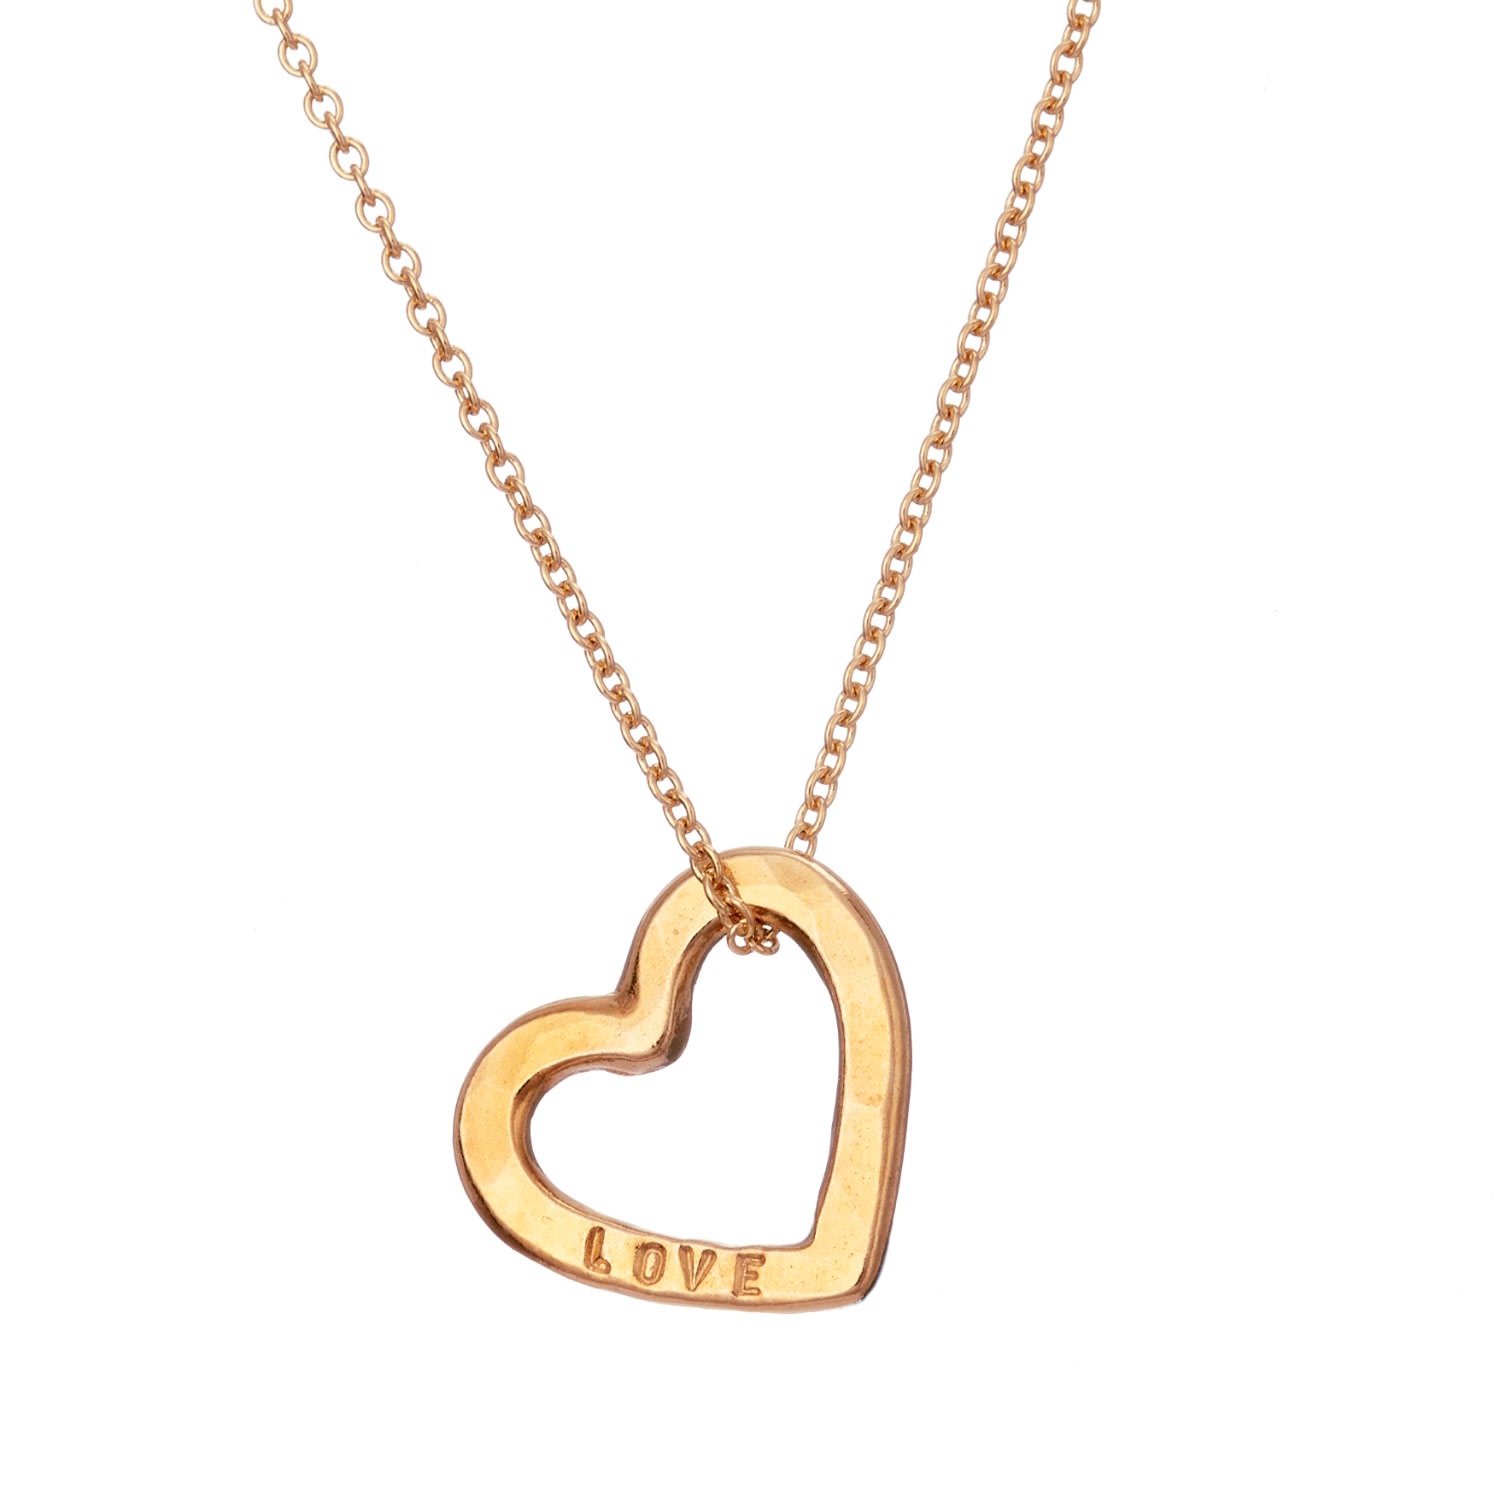 Shop Posh Totty Designs Women's Yellow Gold Plated 'love' Mini Heart Necklace